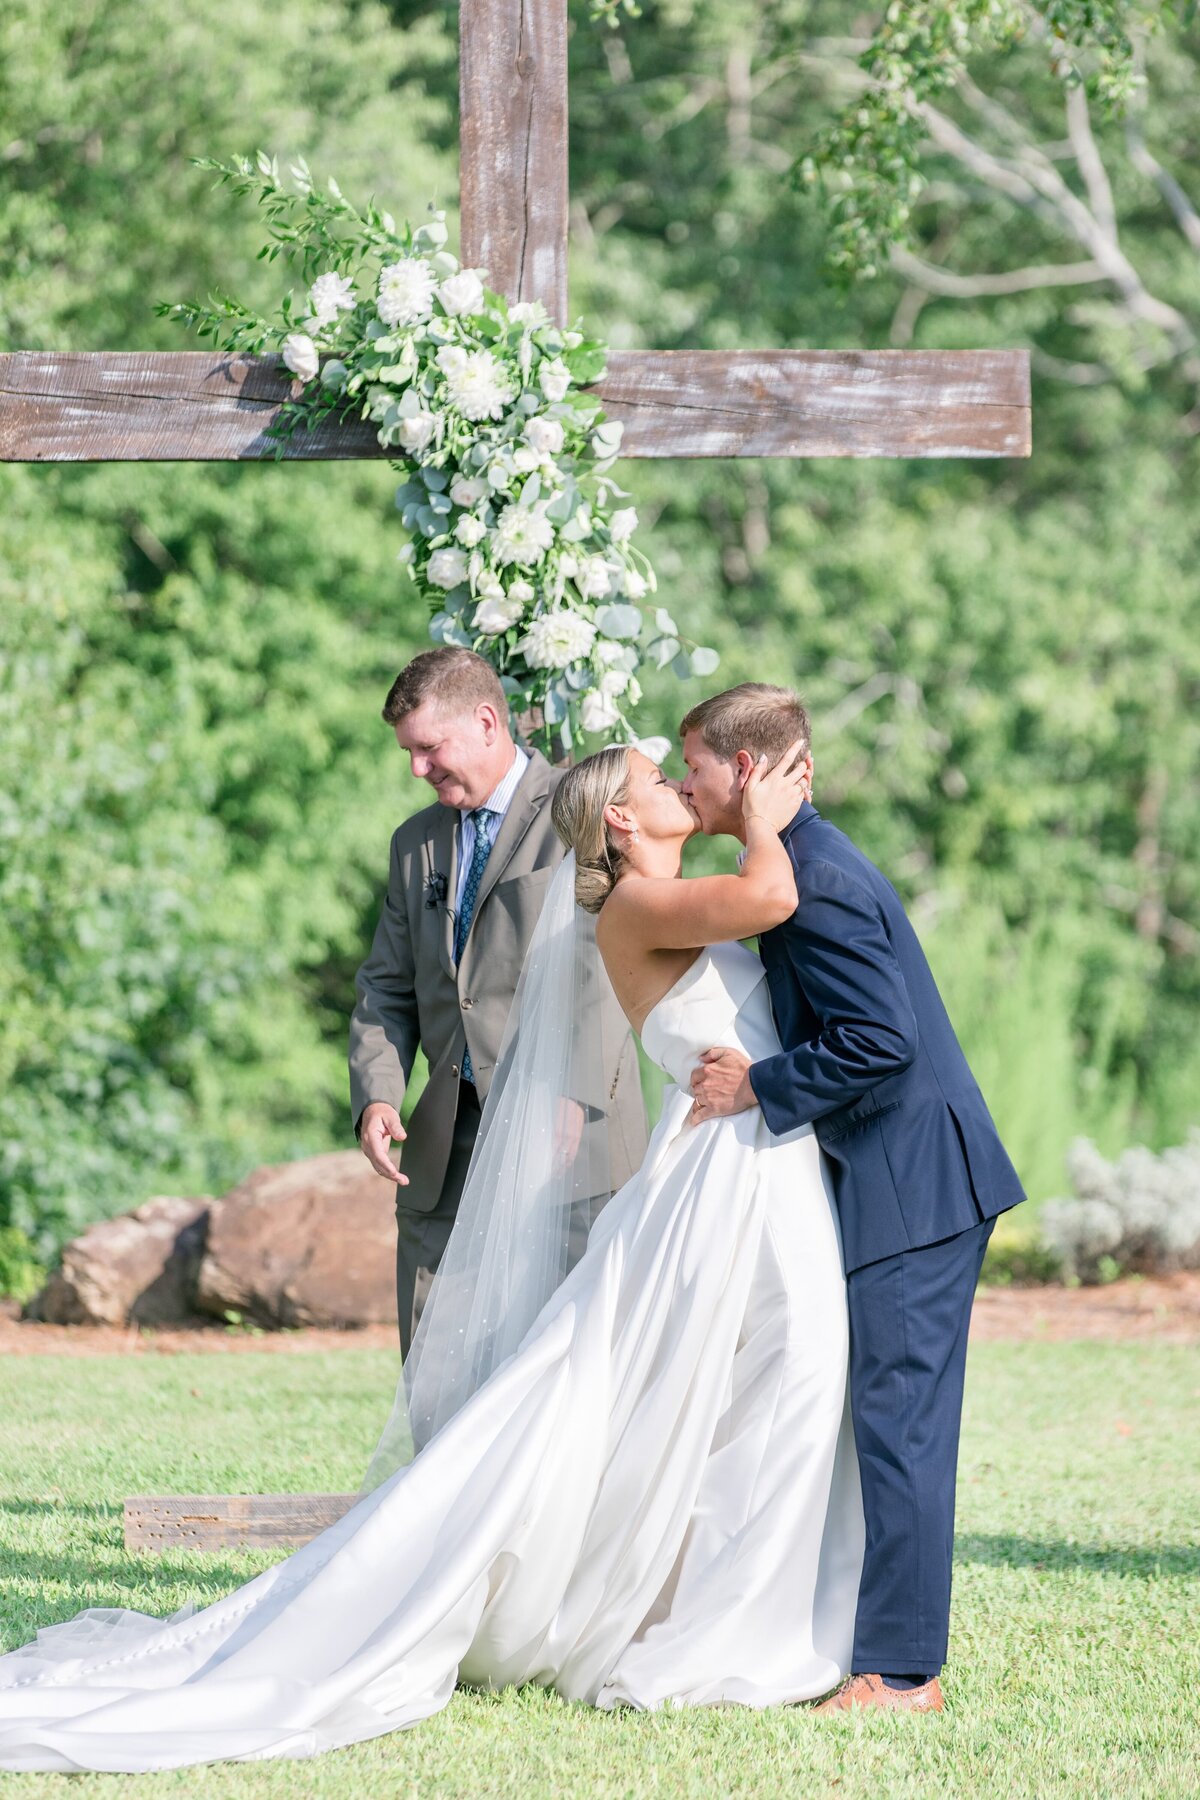 katie_and_alec_wedding_photography_wedding_videography_birmingham_alabama_husband_and_wife_team_photo_video_weddings_engagement_engagements_light_airy_focused_on_marriage__legacy_at_serenity_farms_wedding_25